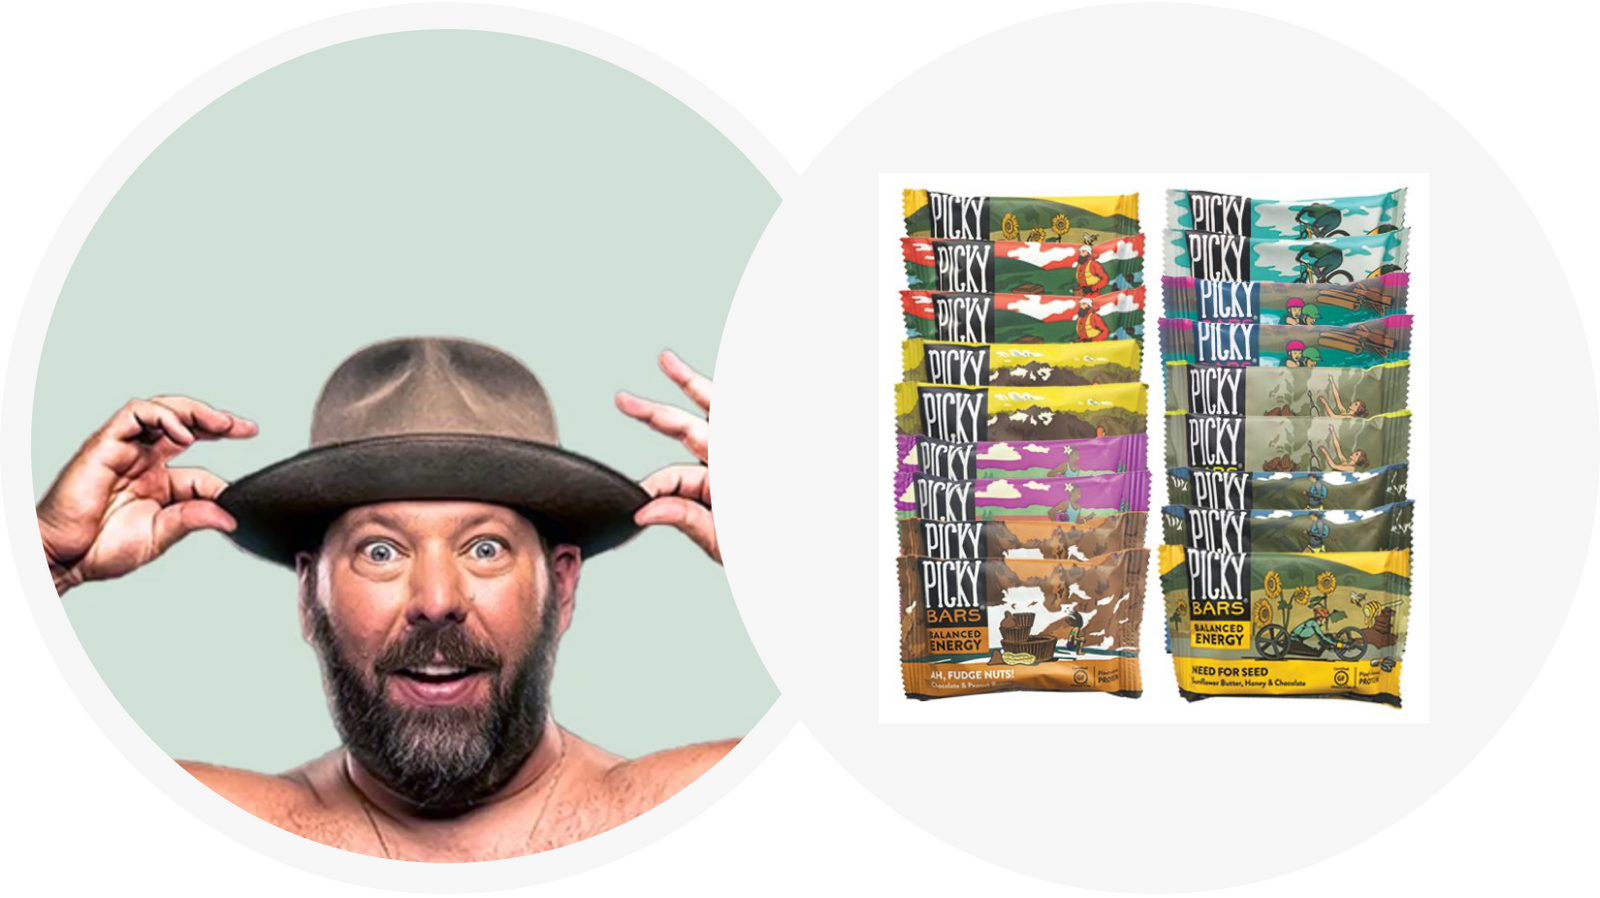 Bert Kreischer wearing a wide-brimmed hat with a surpised expression, and an array of Picky Bars